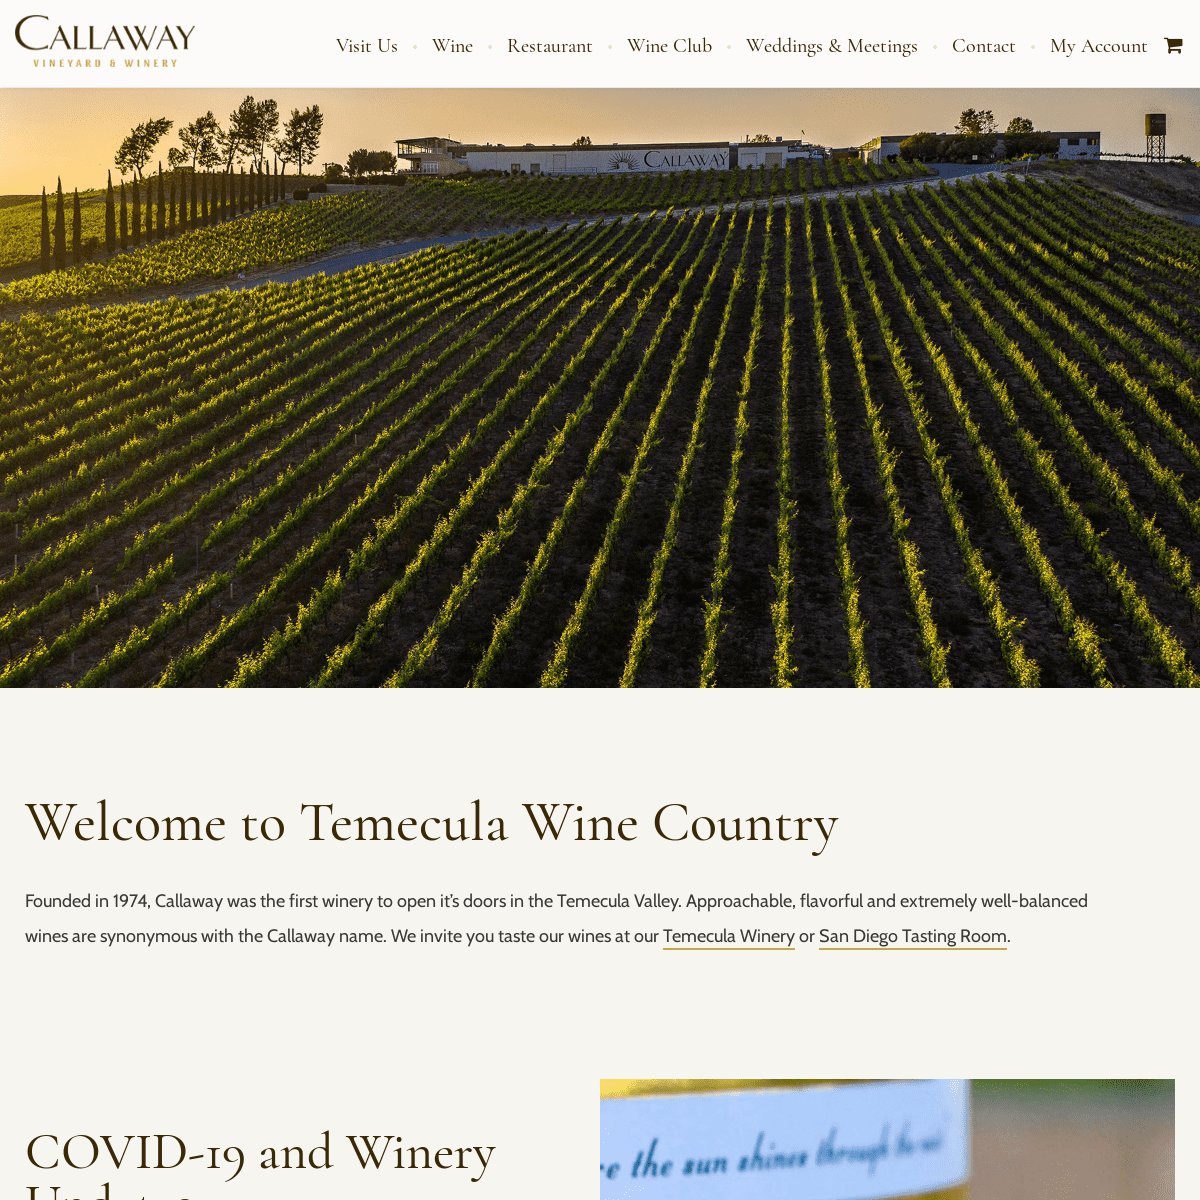 A complete backup of https://callawaywinery.com